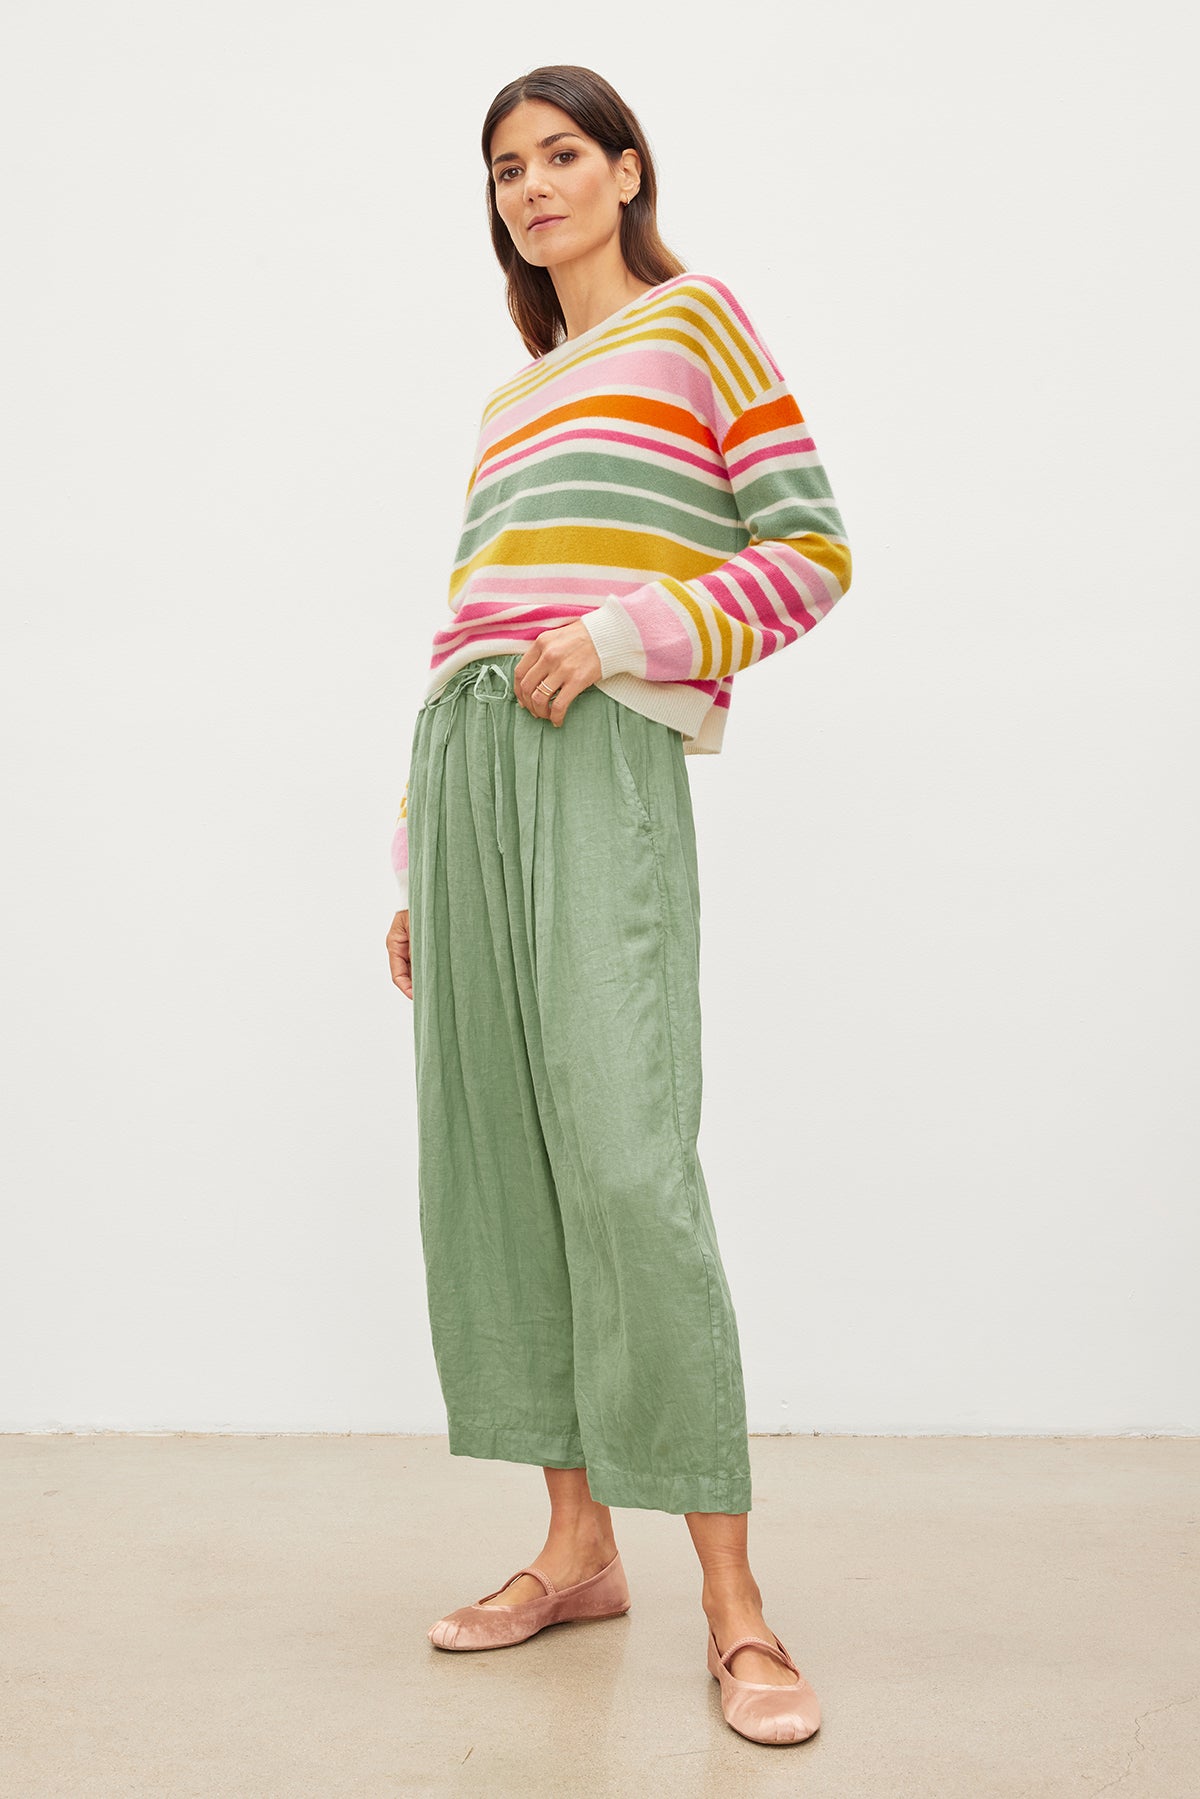 The model is wearing a Velvet by Graham & Spencer ANNY CASHMERE STRIPED CREW NECK SWEATER with ribbed details and green culottes.-35955370098881